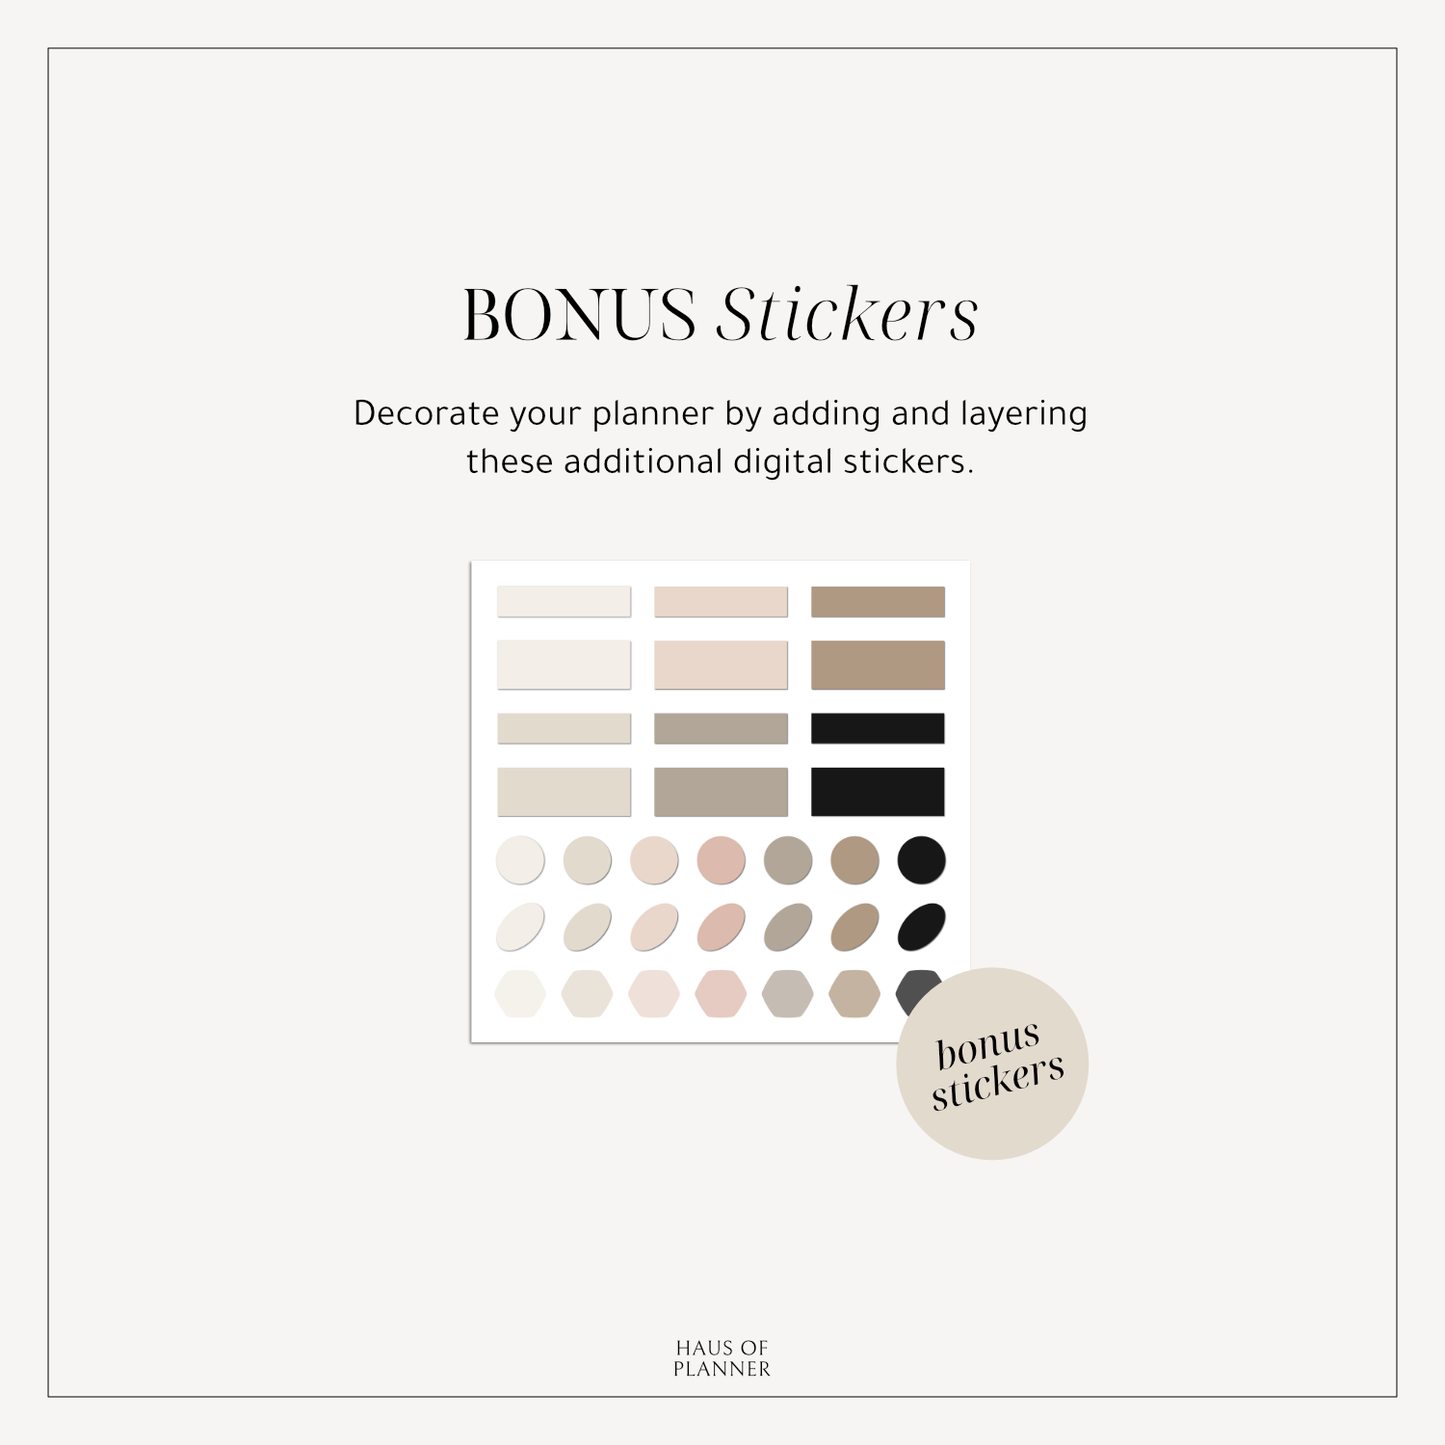 Daily / Productive Digital Stickers | 5 Neutral Colors